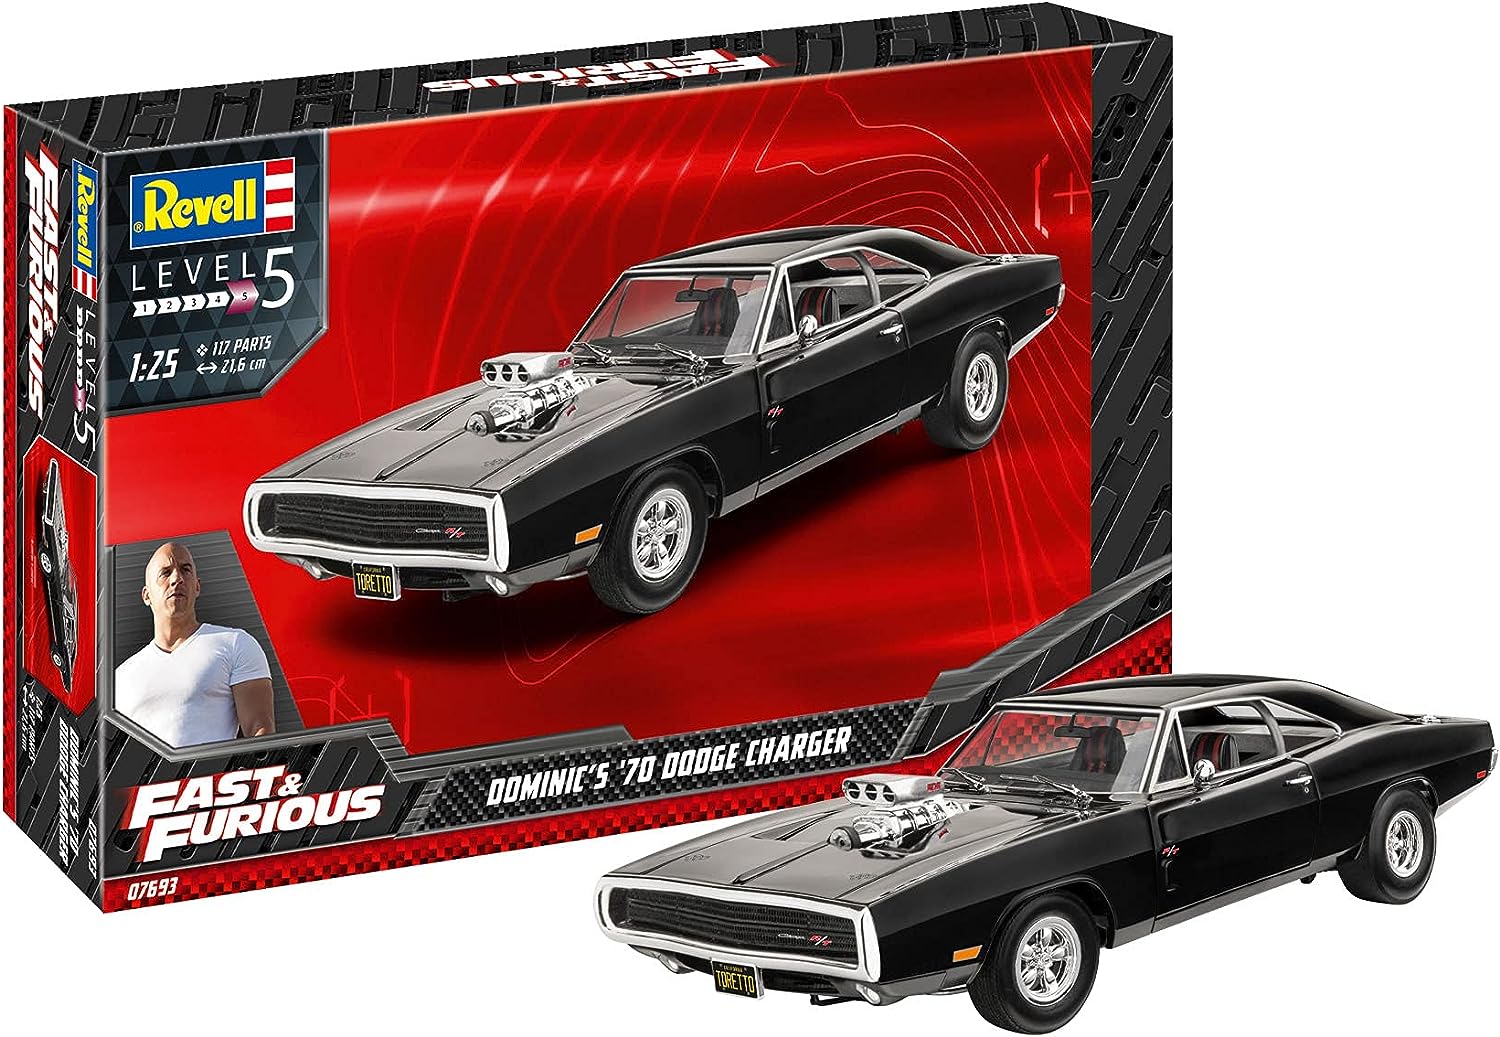 REVELL 67693 KIT DI MONTAGGIO FAST & FURIOUS DOMINIC 1970 DODGE CHARGER SCALA 1/24